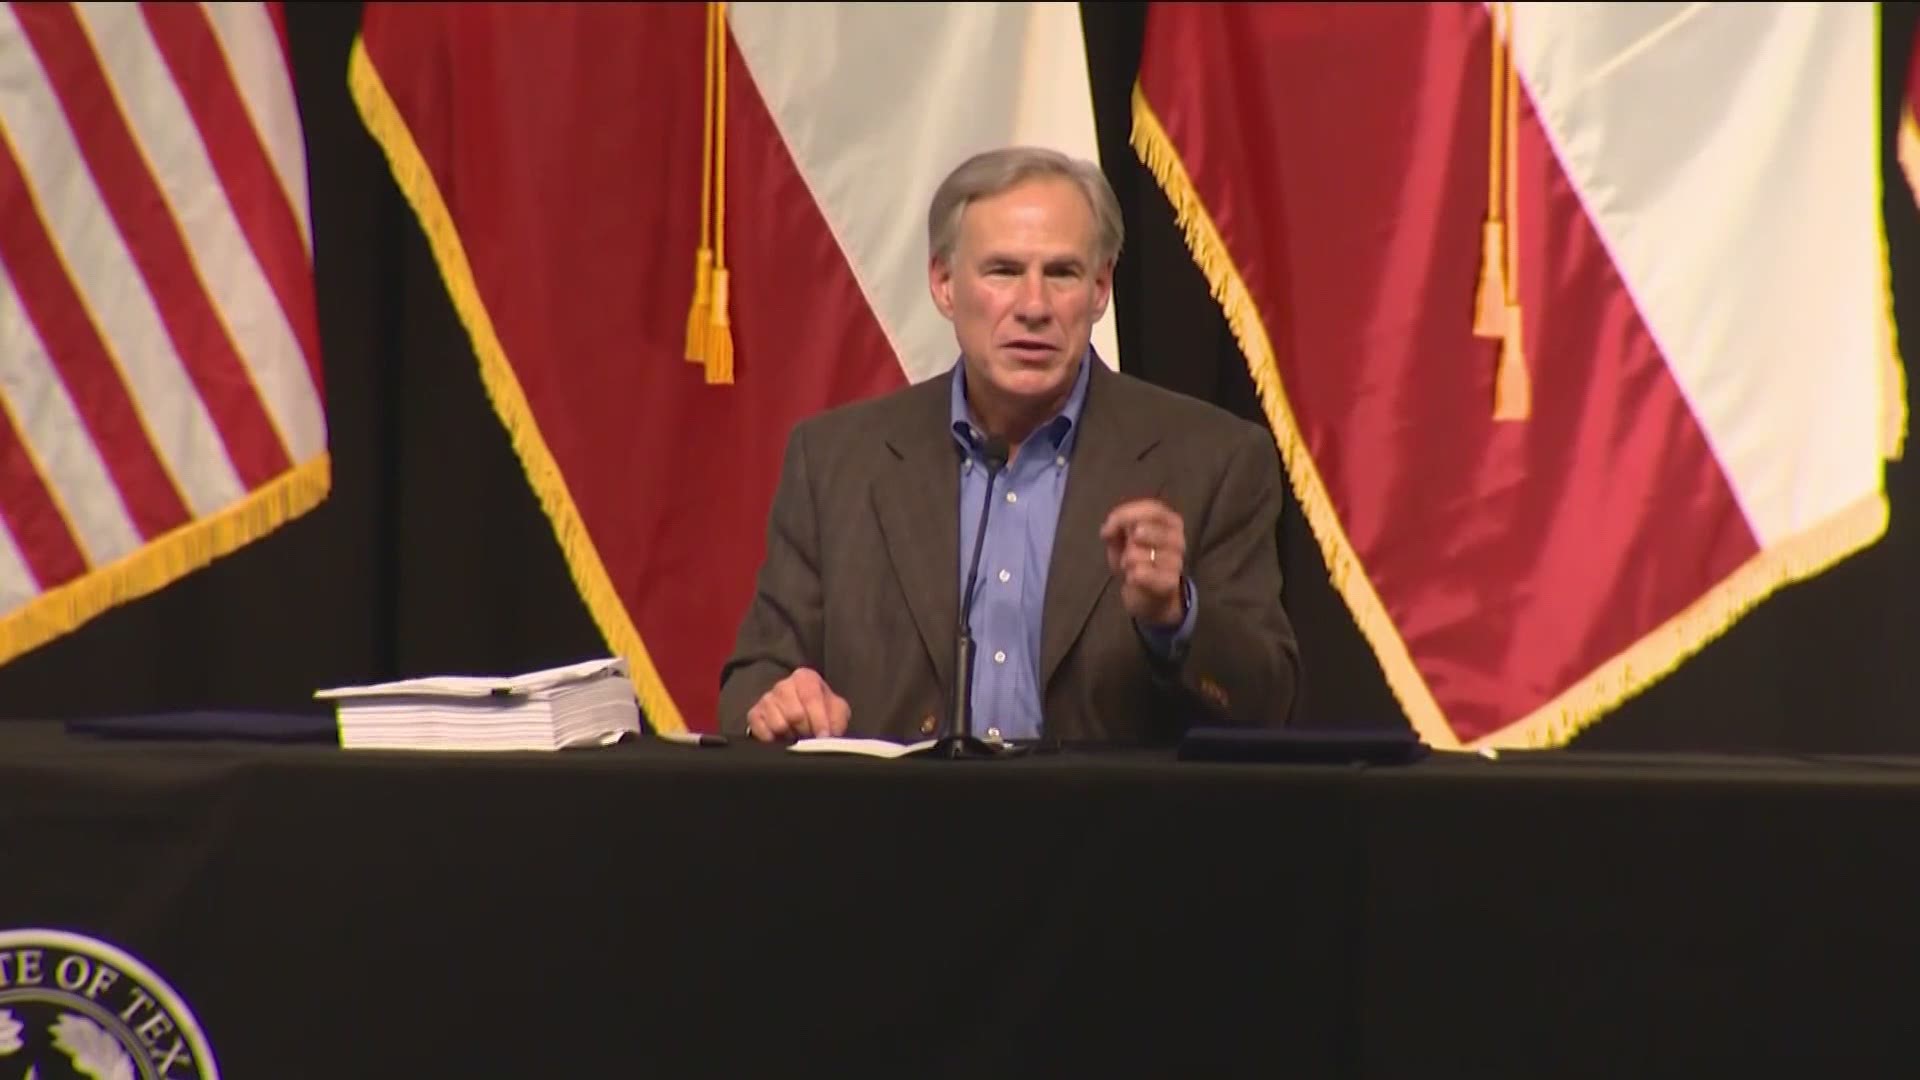 Gov. Greg Abbott announced Thursday that Texas will build a border wall along the state’s boundary with Mexico but did not provide details on where or when.